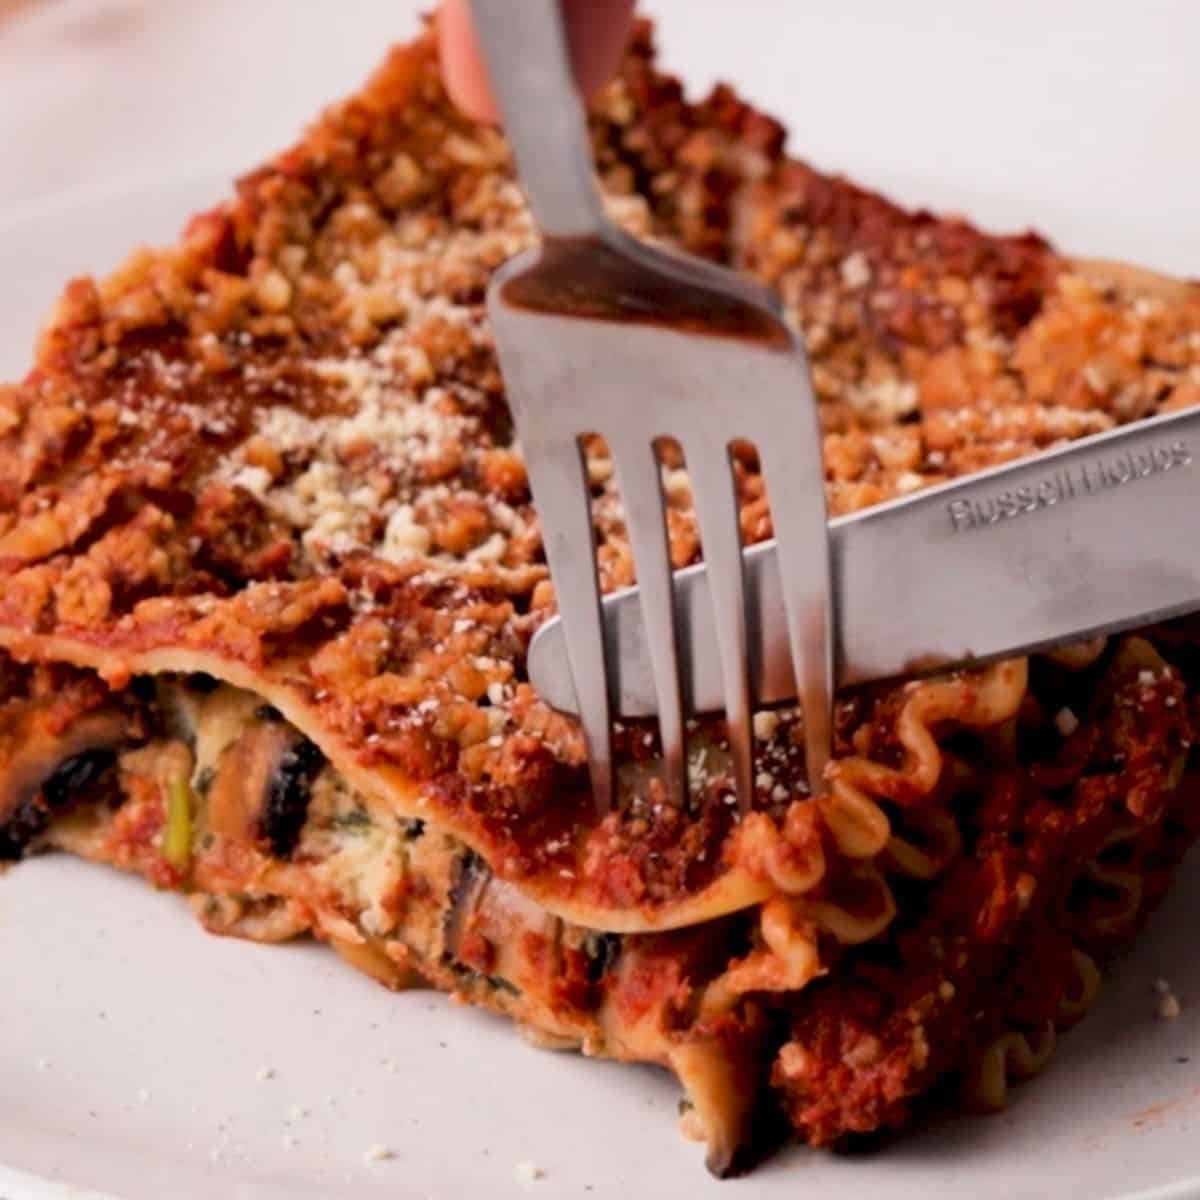 Fork and knife cutting into slice of vegan lasagna.